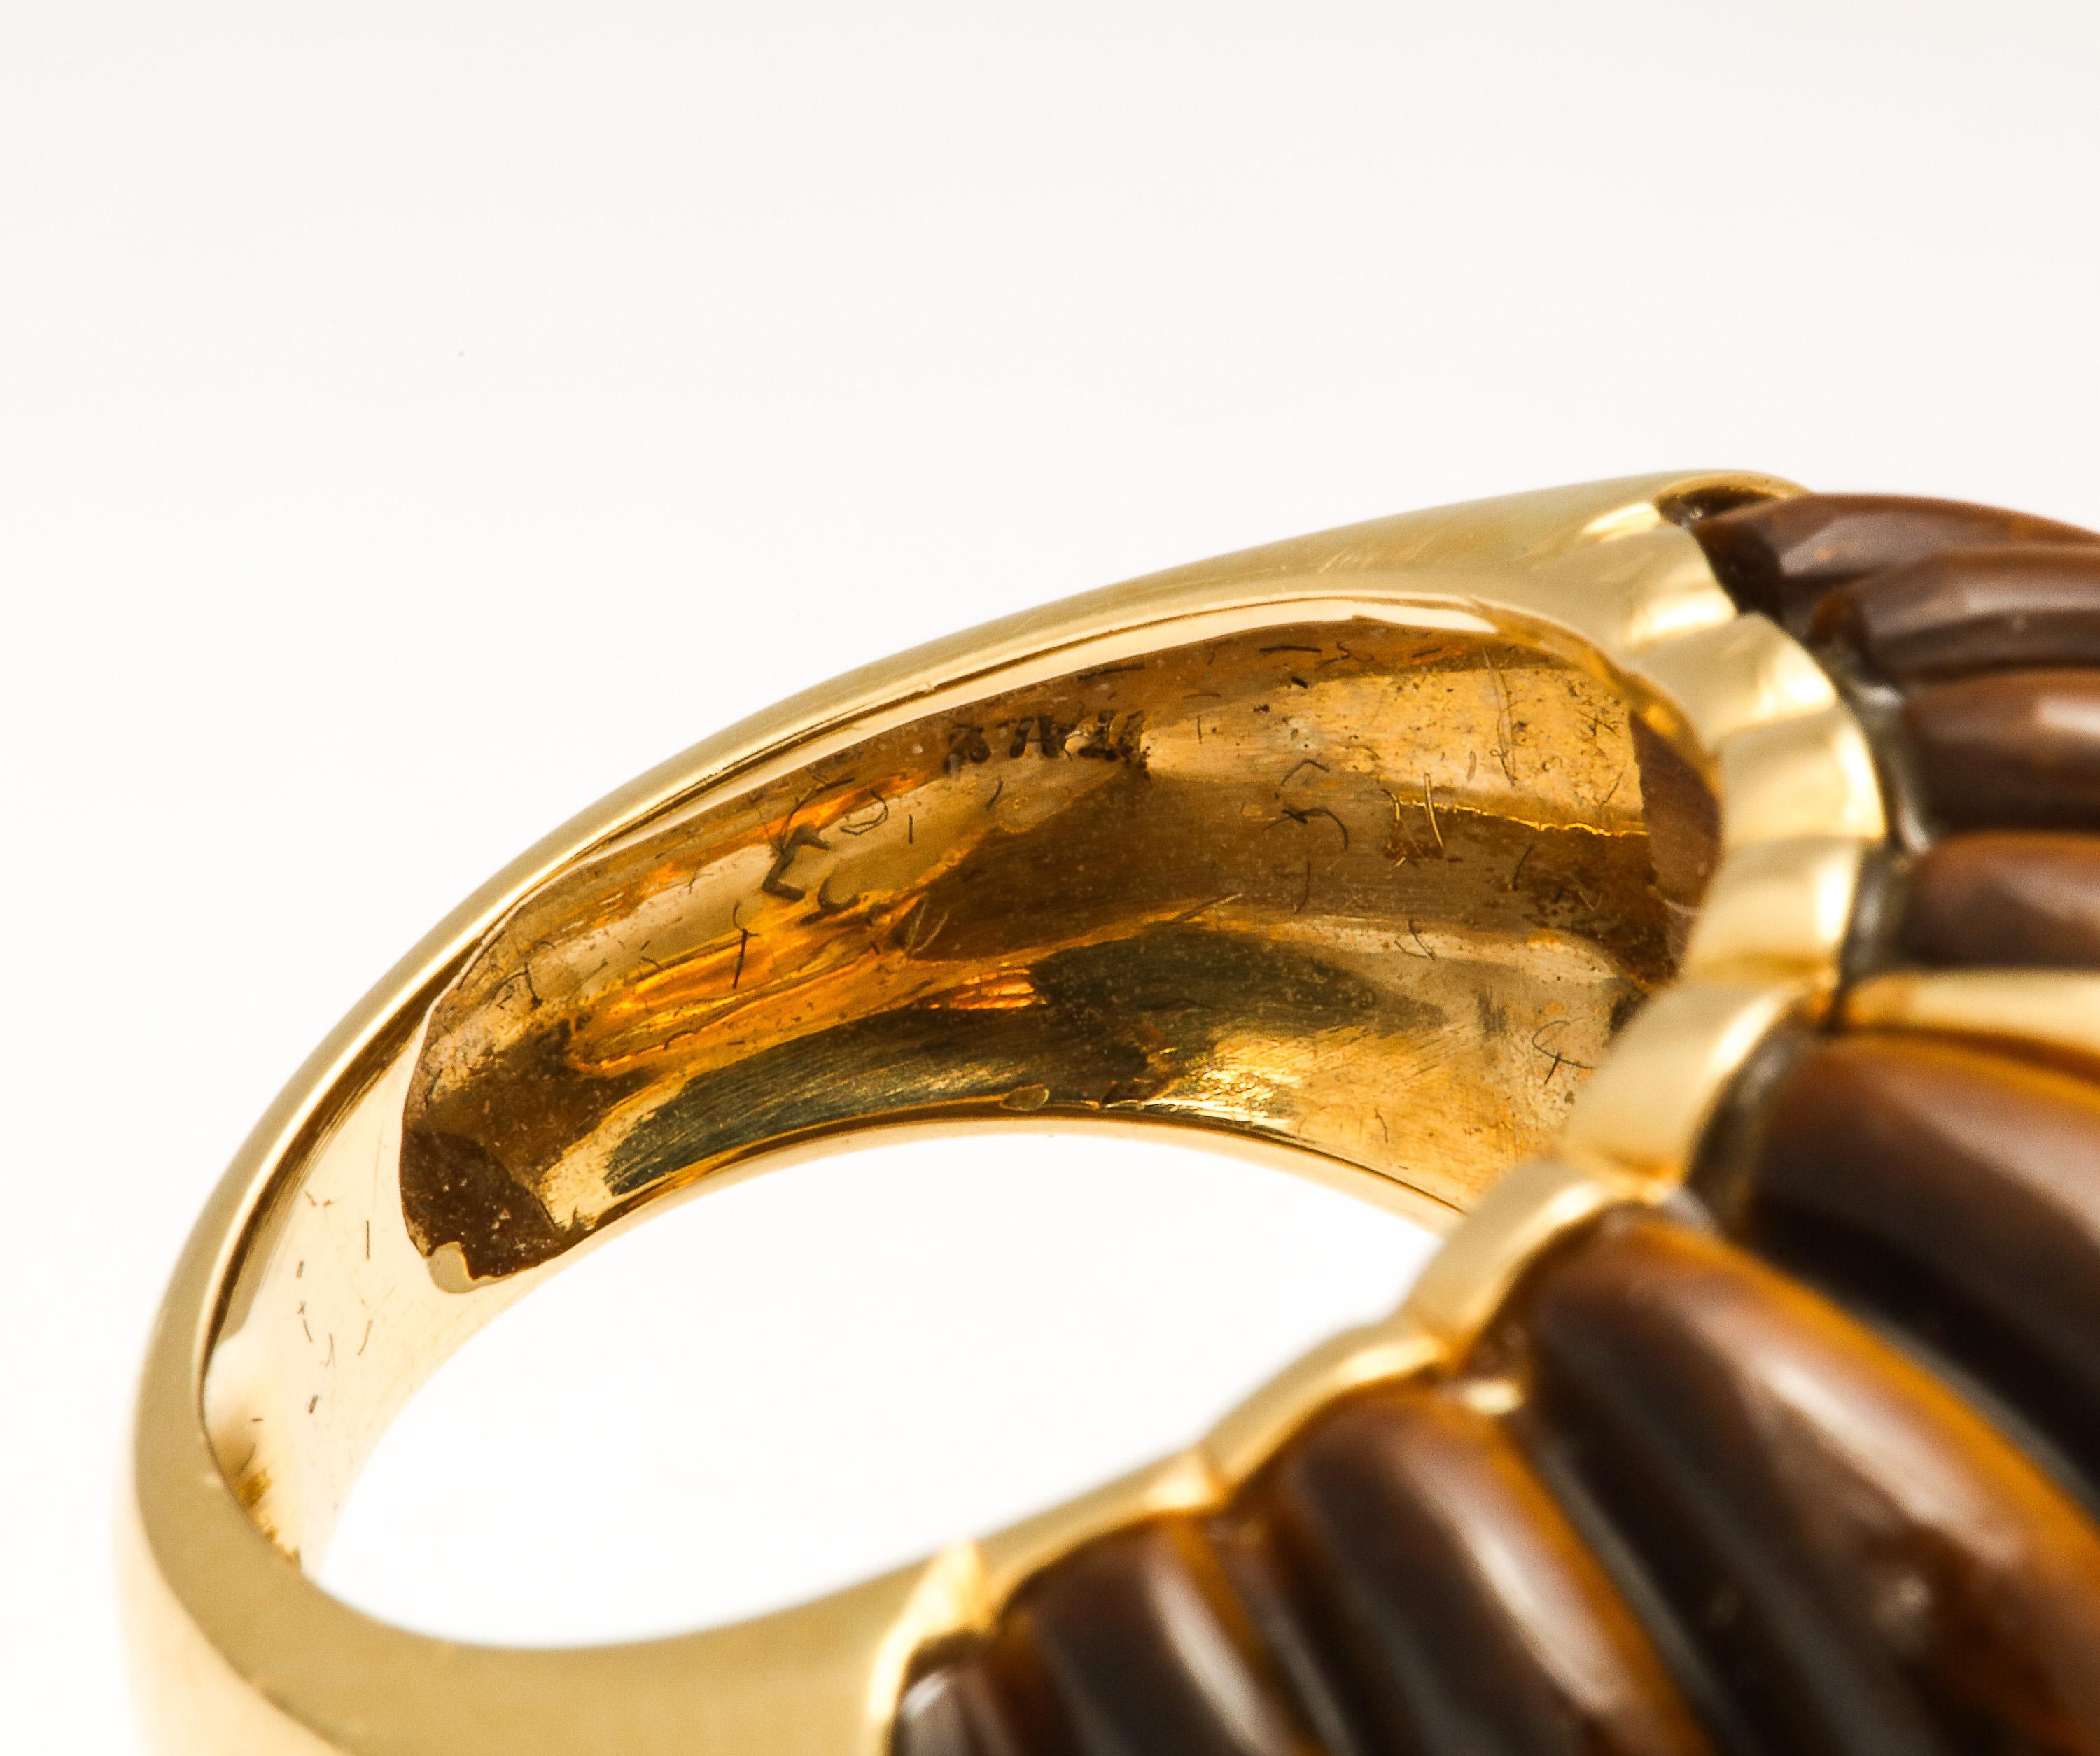 Tiger's Eye Melon Shaped Ring with Center Gold Bar For Sale 4